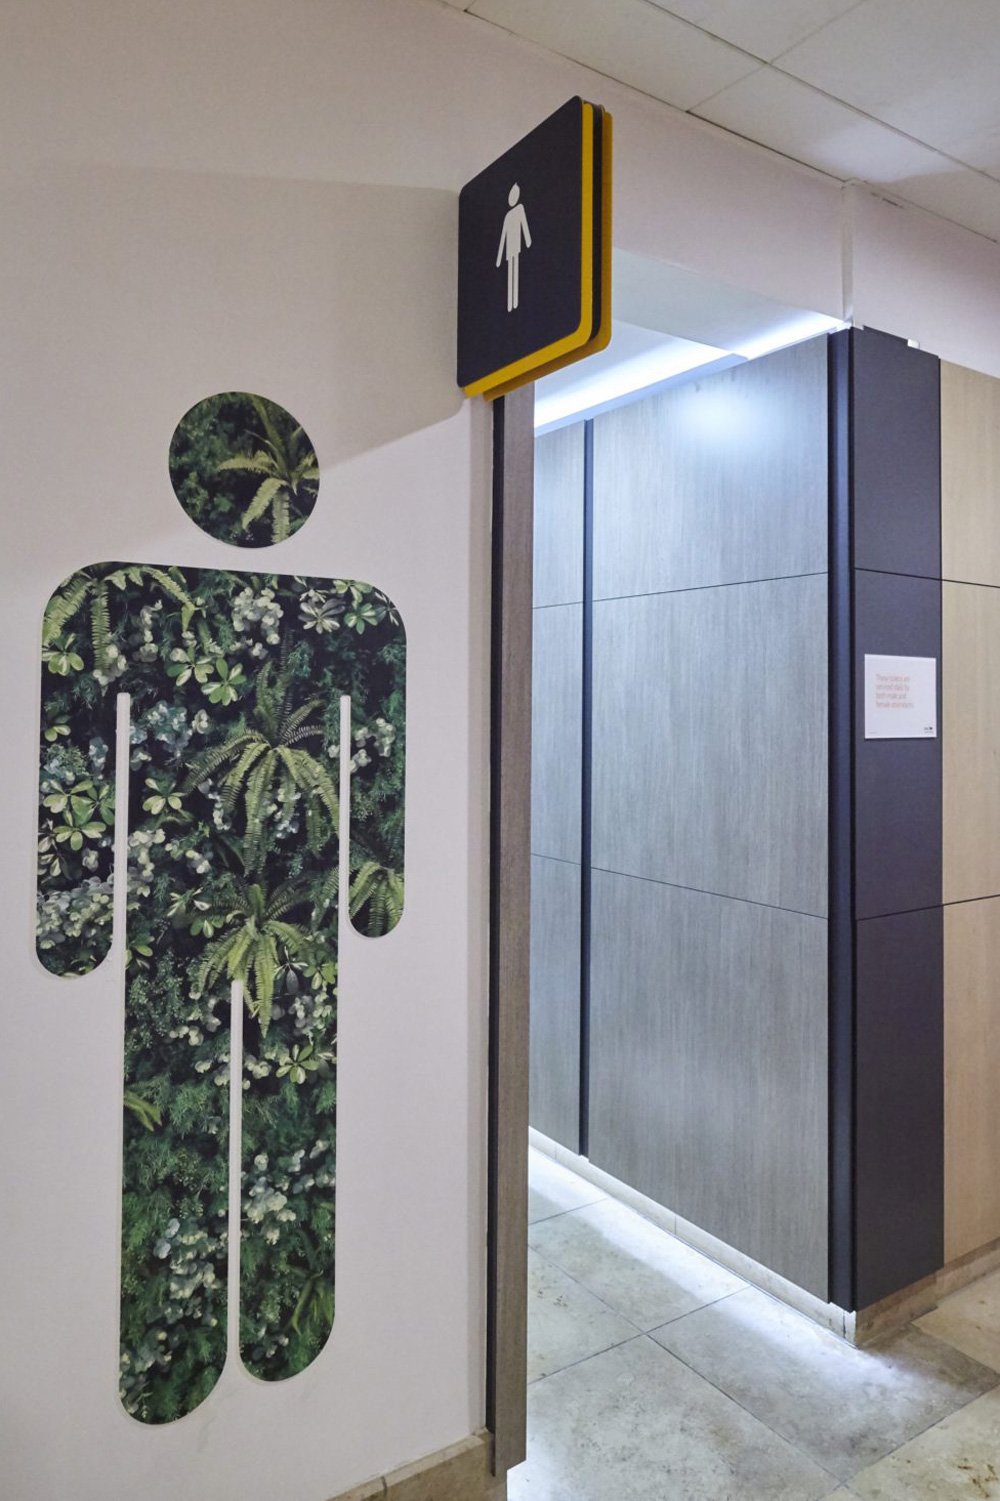 Male sign and green gallery wall mural outside uxbridge shopping centre toilets.jpg